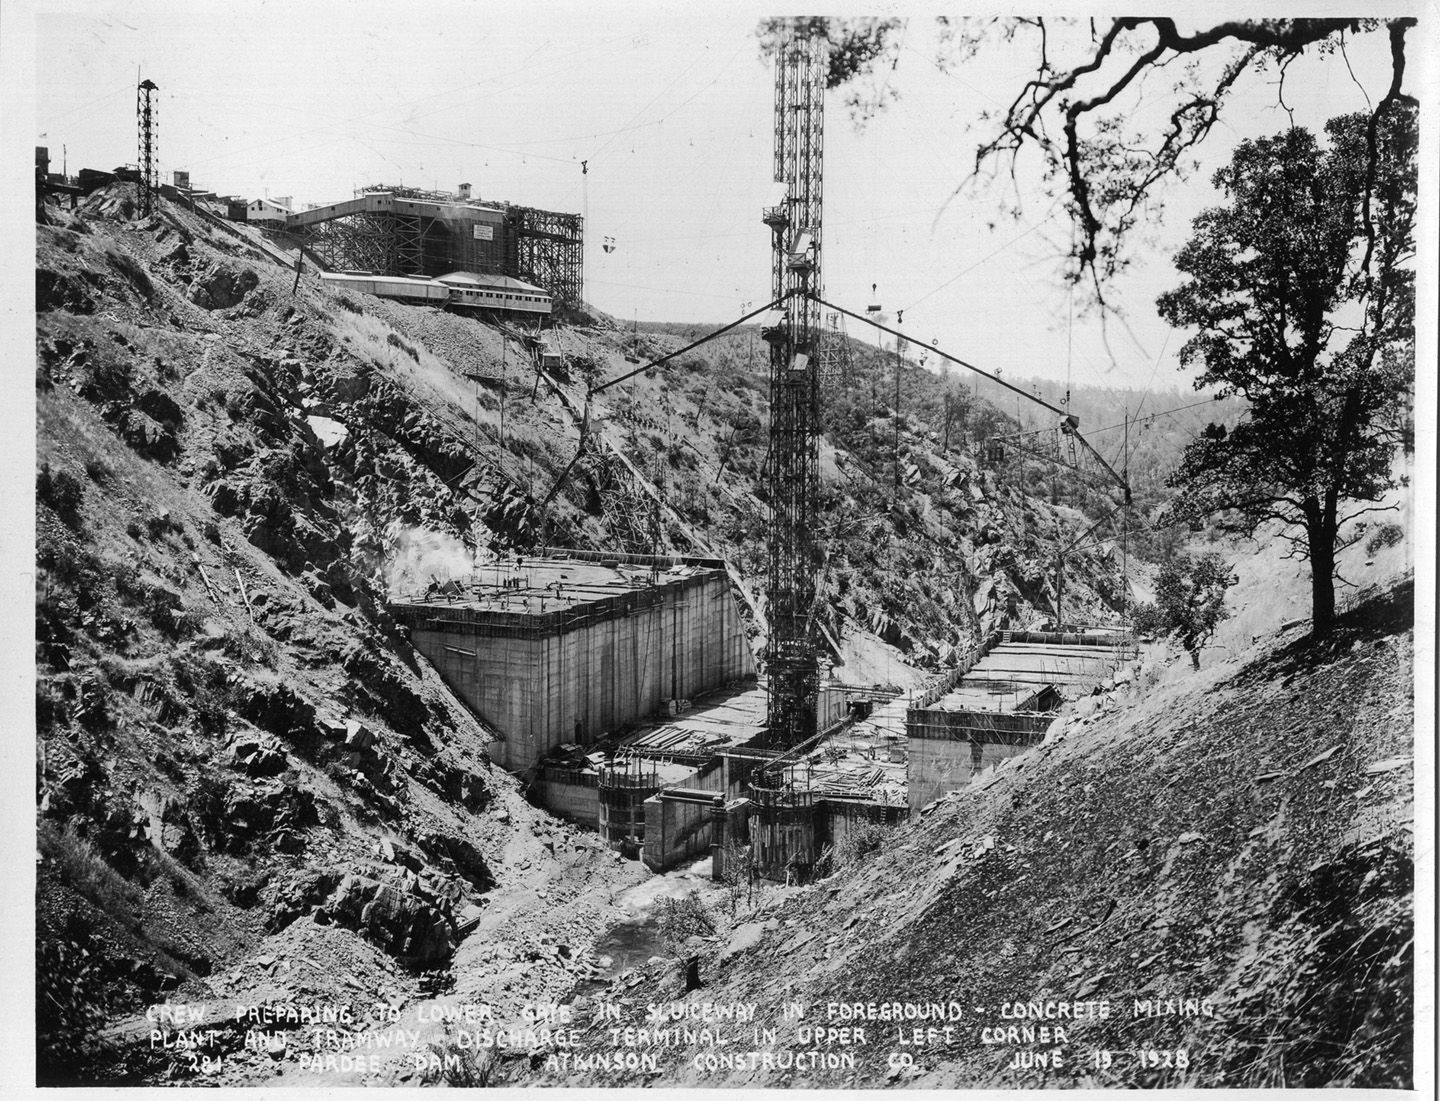 Crew preparing to lower gate in sluiceway in foreground - concrete mixing plant and tramway discharge terminal in upper left corner. (June 1928)